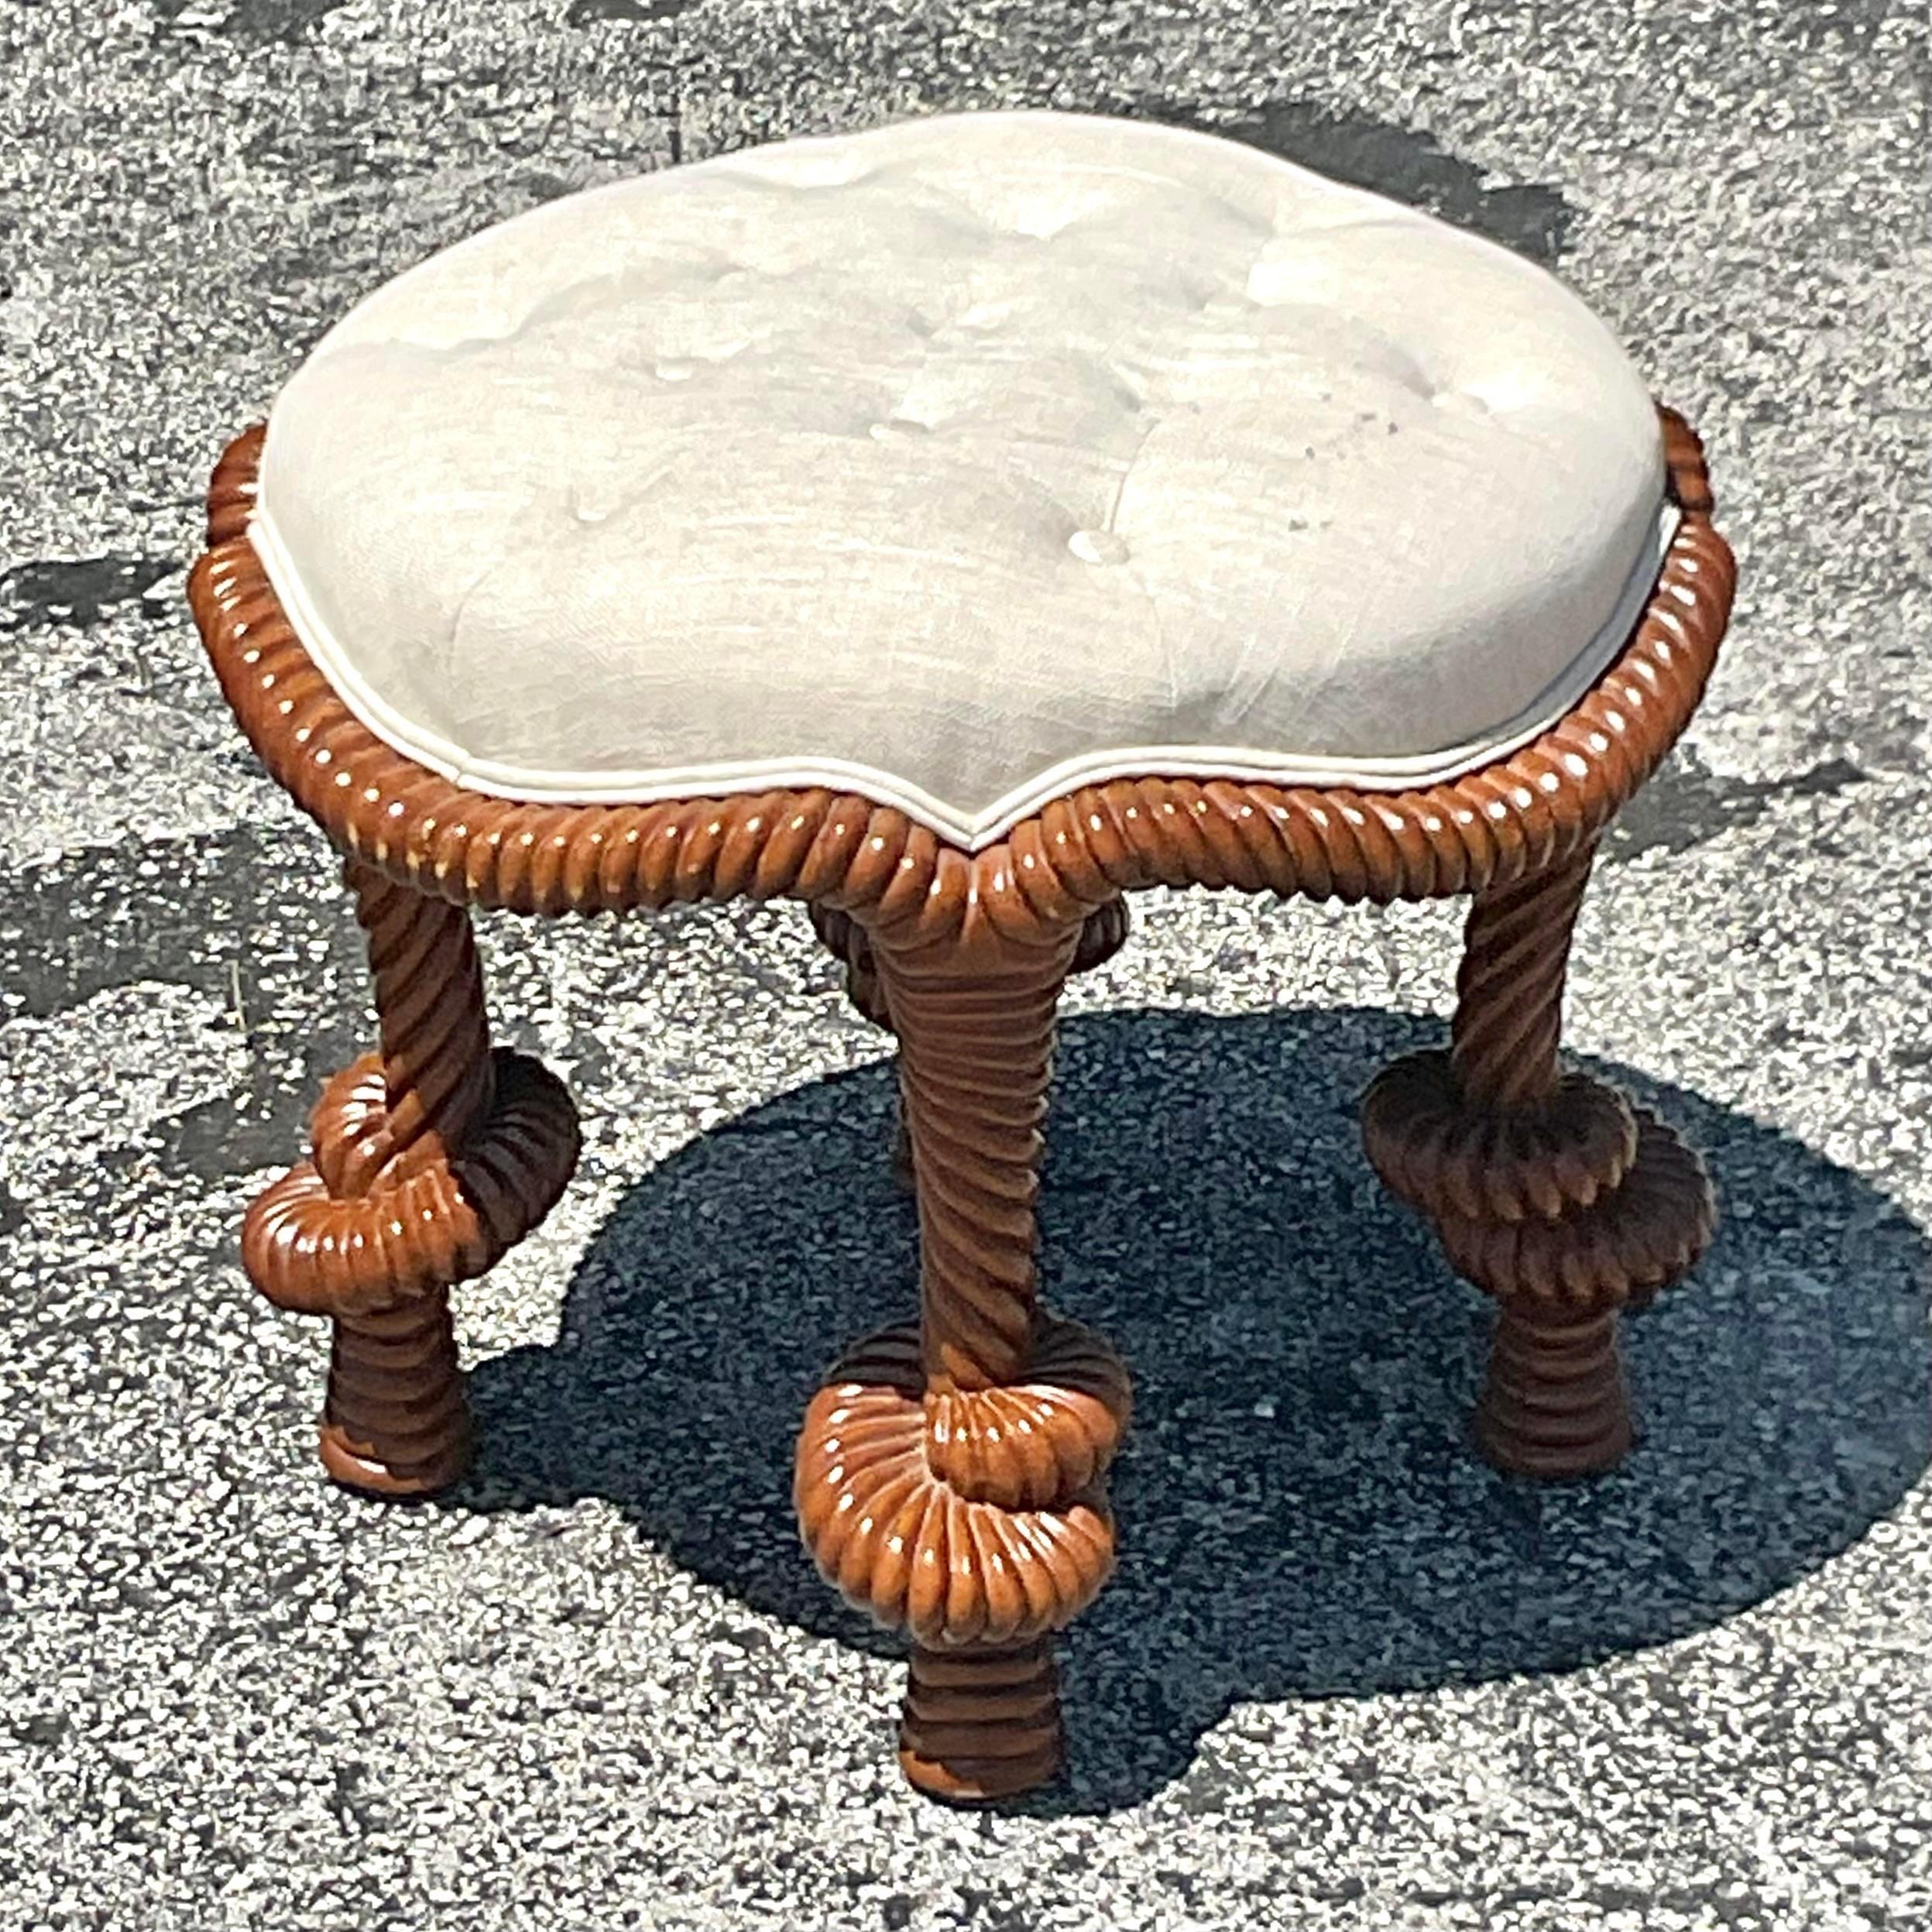 Experience elegance with our Vintage Regency Carved Knot Tufted Low Stool. This American-style treasure showcases intricate carving and plush tufted upholstery, adding a touch of sophistication to any room